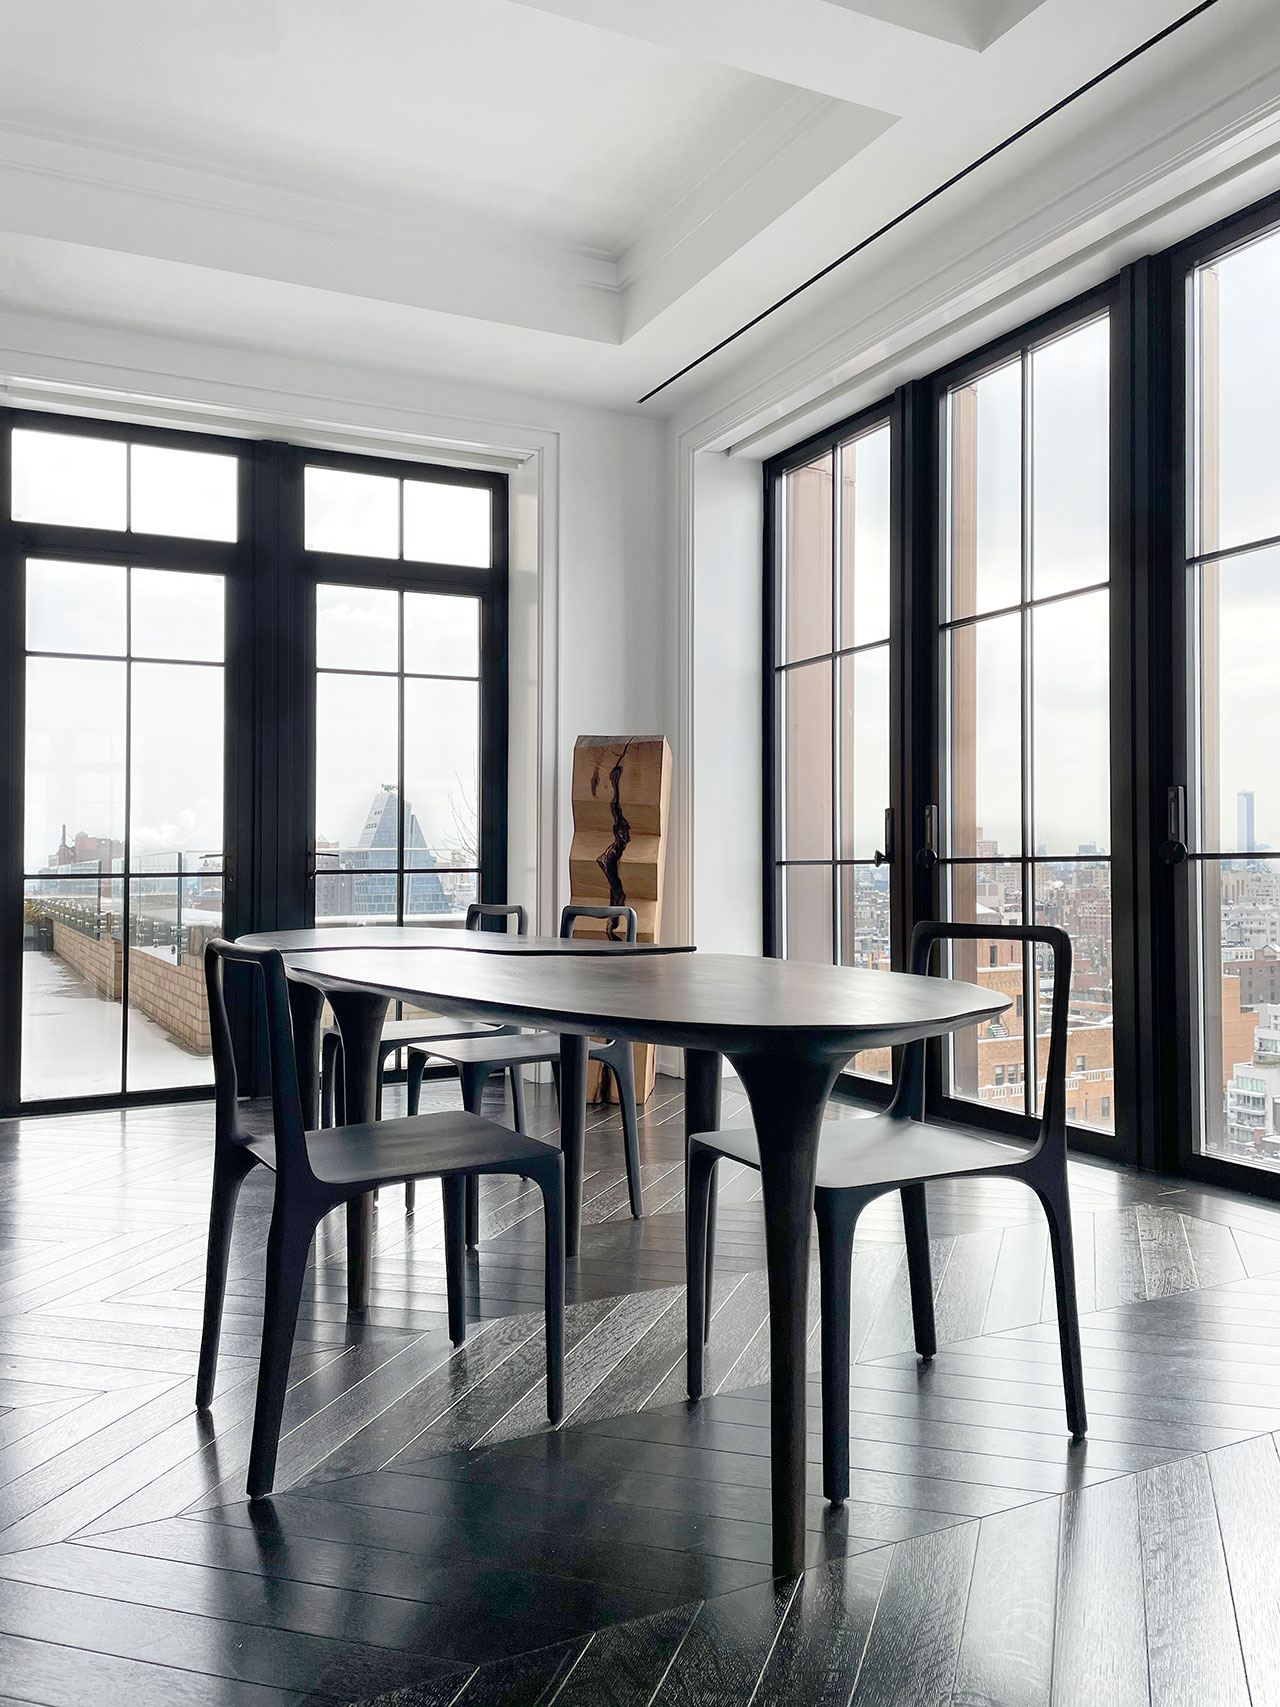 Galerie Philia at Walker Tower, Chelsea, New York. Courtesy of Galerie Philia.
Featured:
Vince Skelly, Corsica Tower, 2020. Oak. 30 x 30 x 127 cm.
Cedric Breisacher, Dot chair, 2020. Hand-sculpted solid oak. H 46/80 cm x P 44 cm x L42 cm.
Cedric Breisacher, Dining table, 2020. Hand-sculpted plane tree.